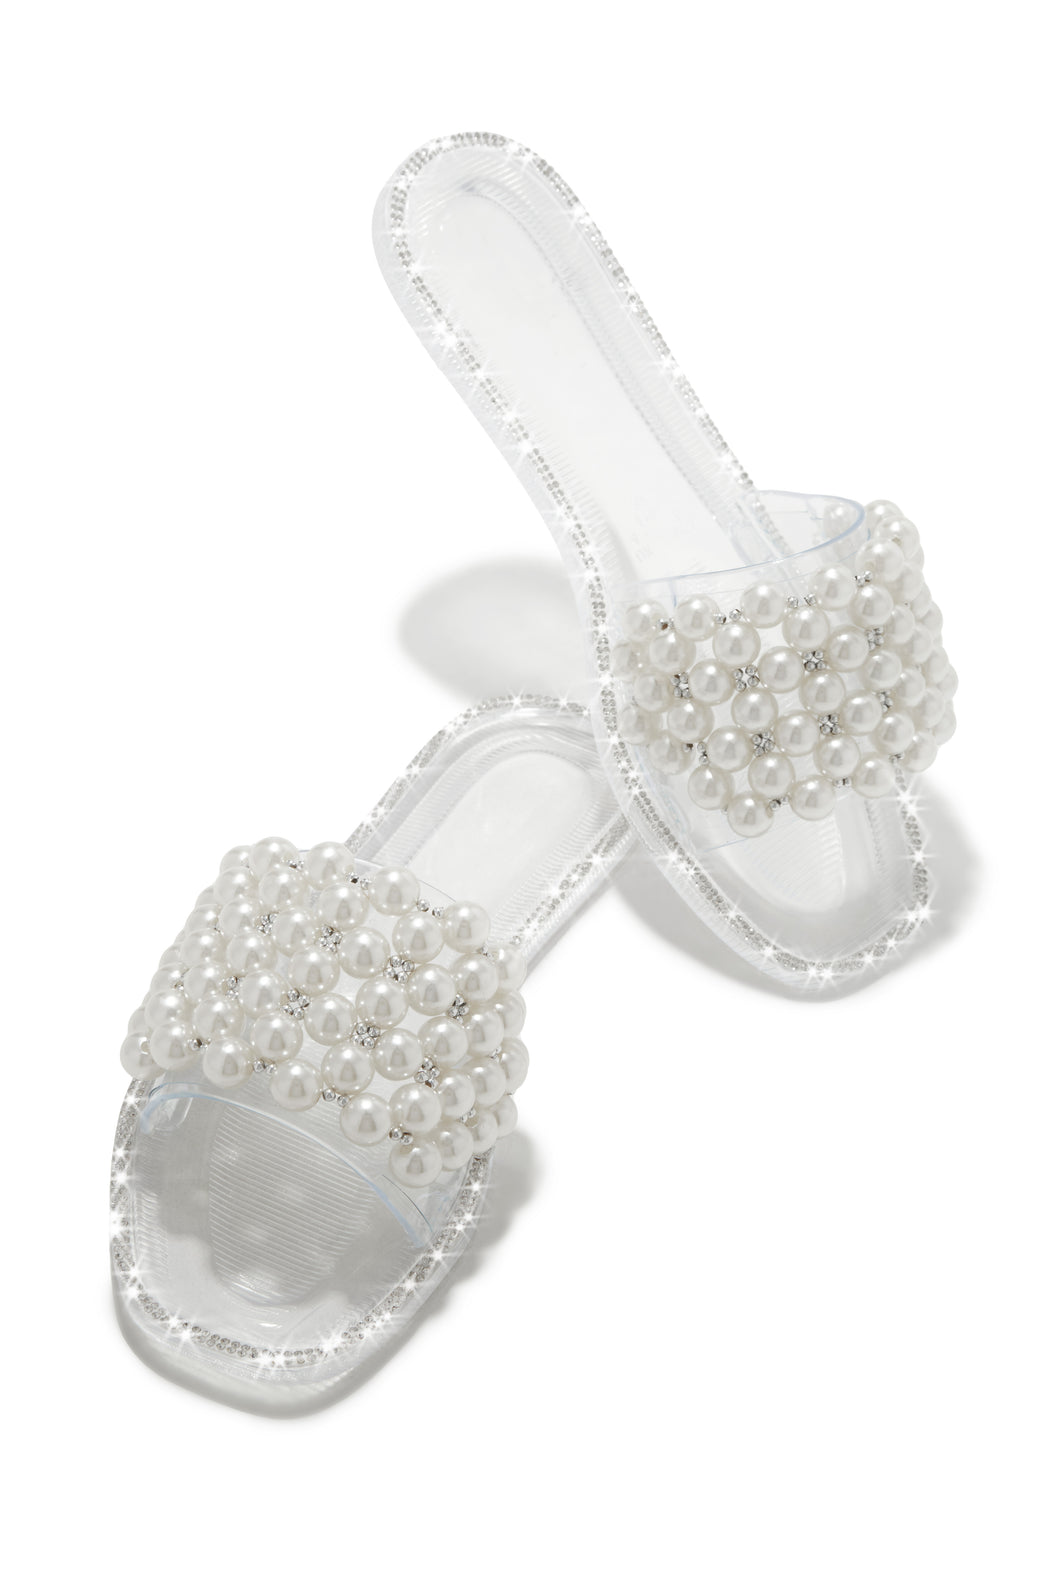 Cute Embellished Clear Sandals